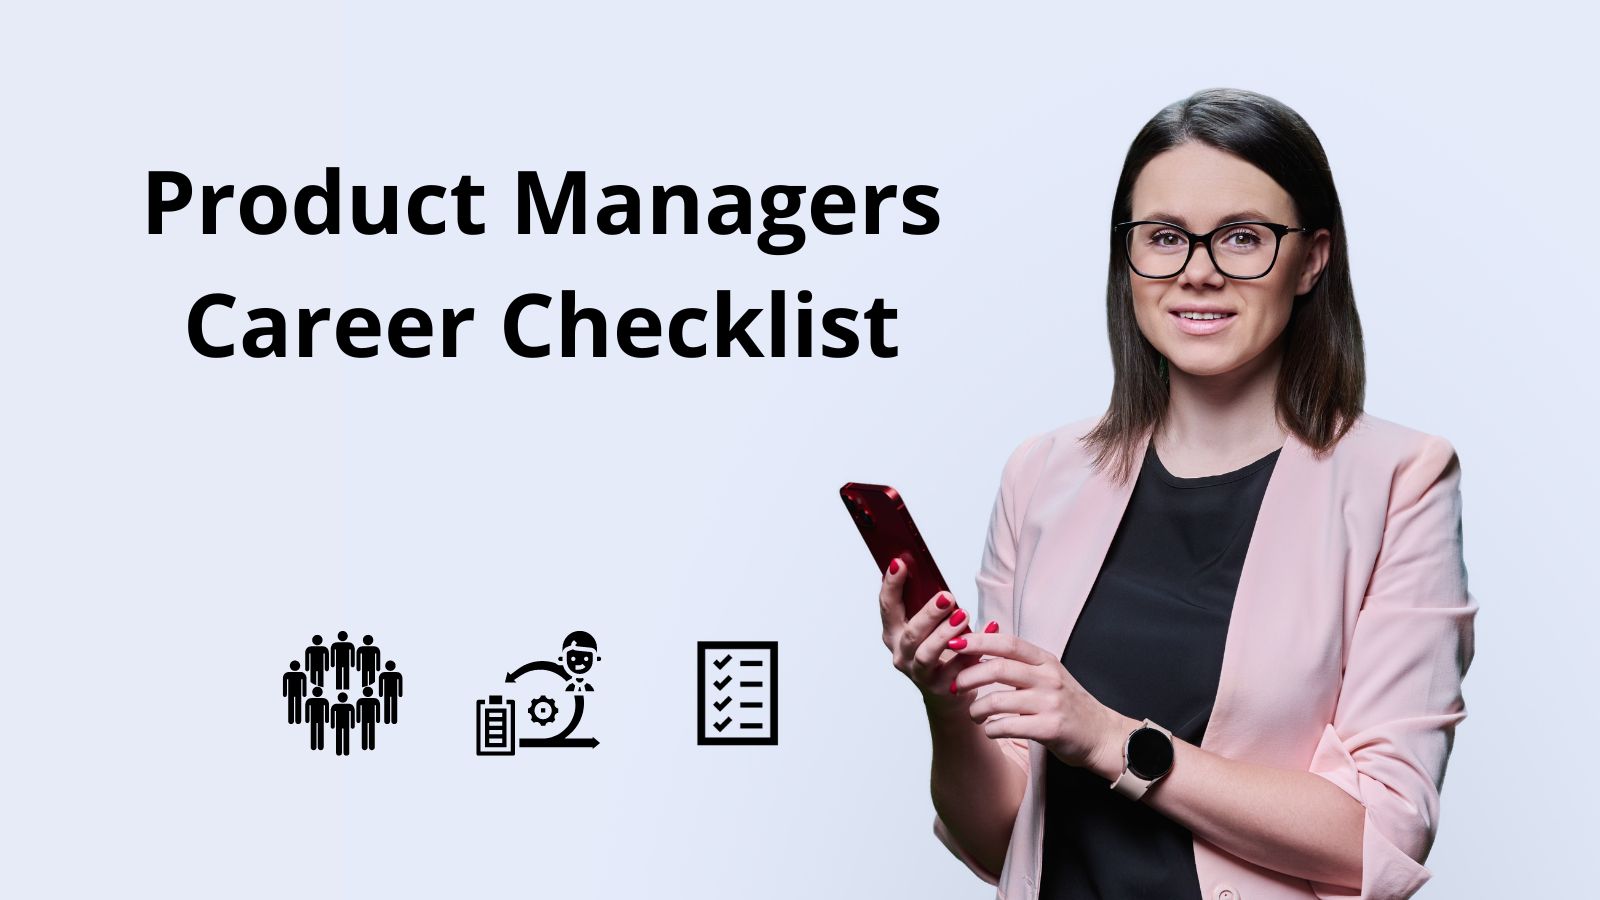 Product Managers Career Checklist